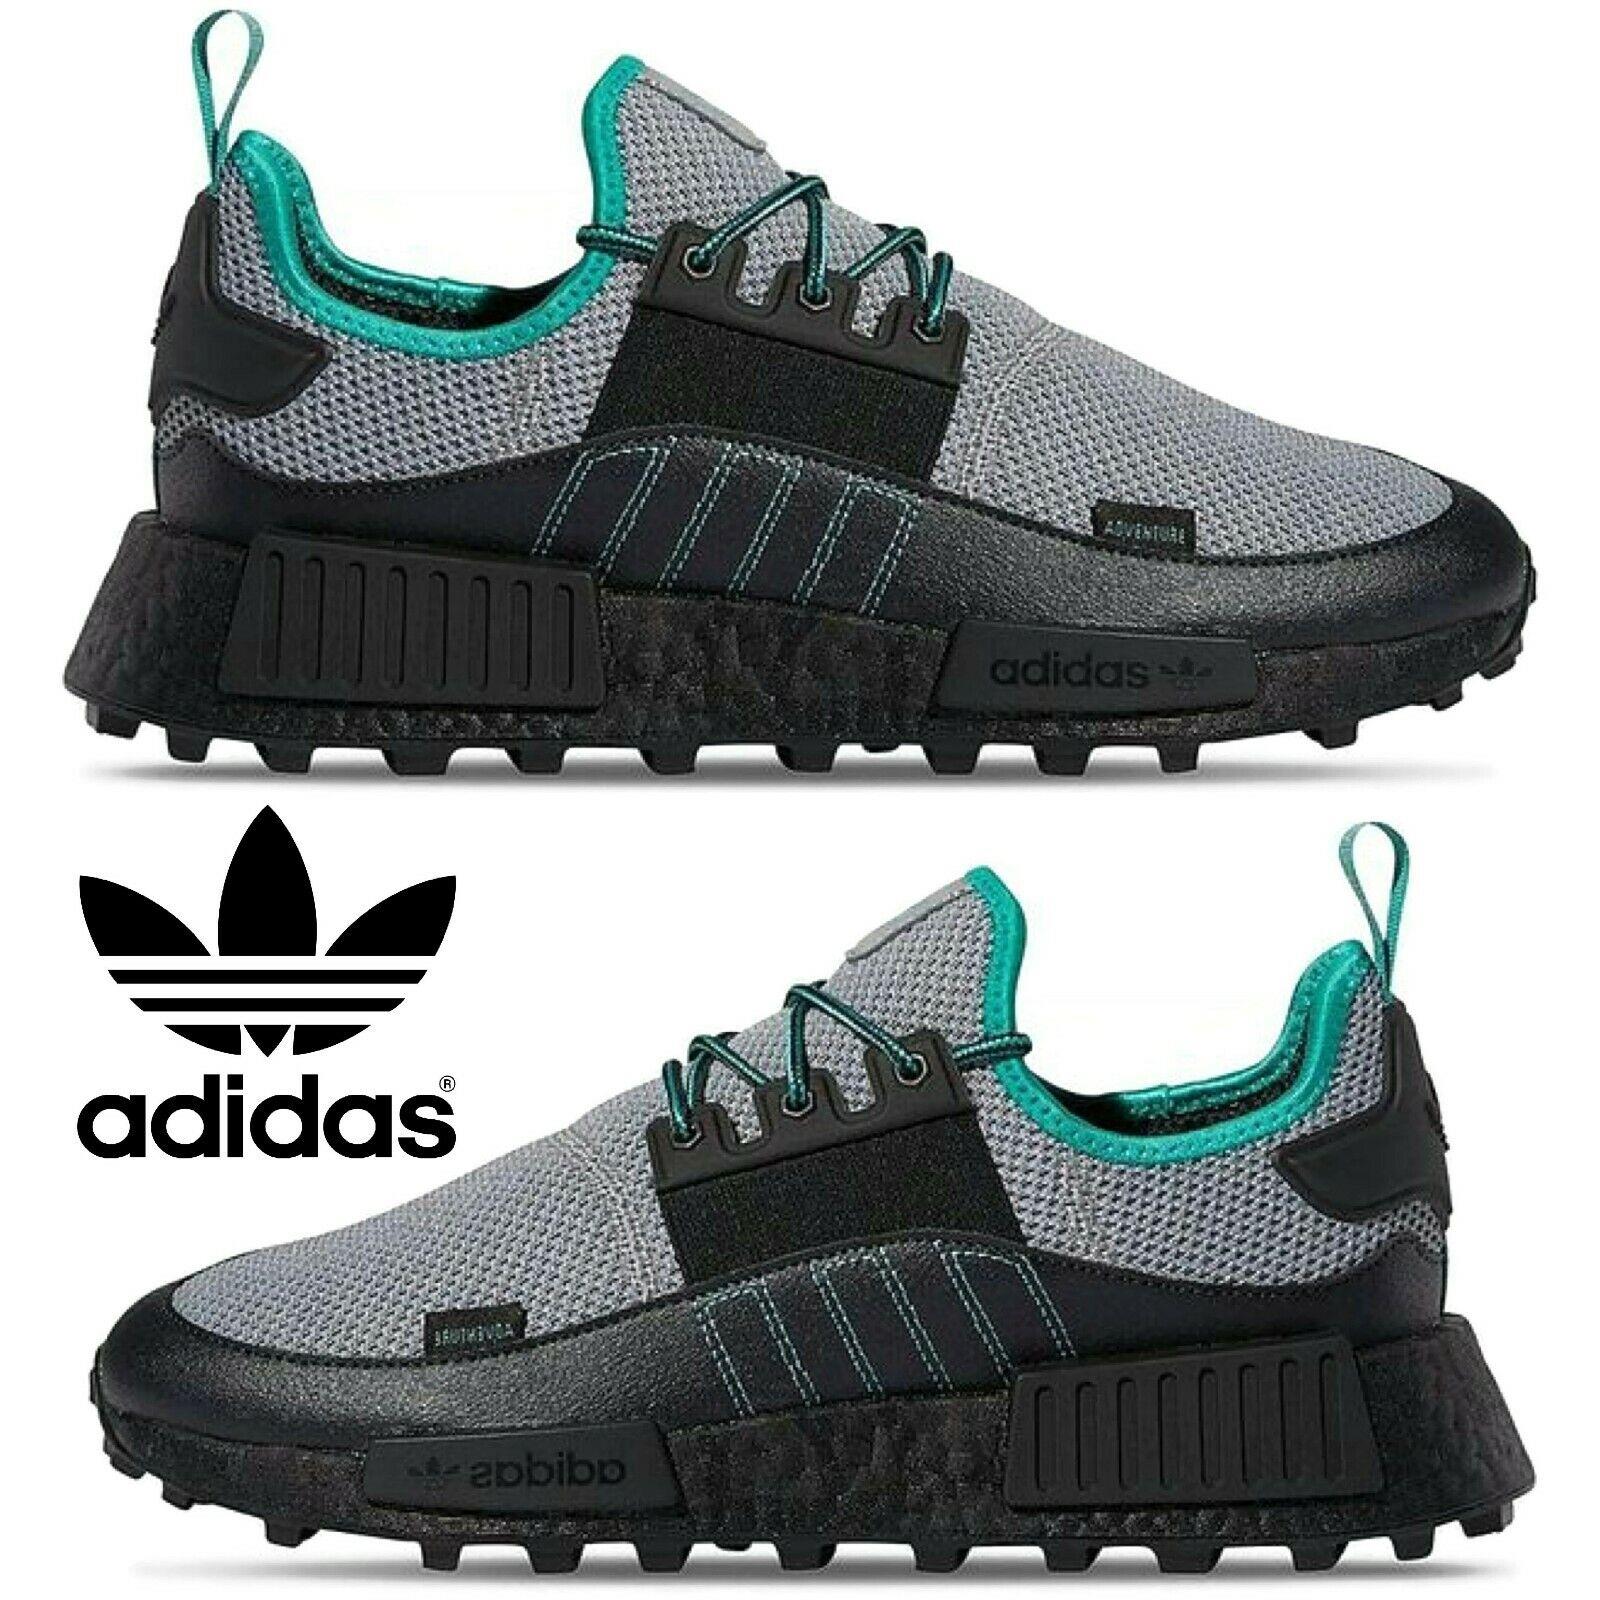 Adidas Originals Nmd R1 Men`s Sneakers Running Shoes Gym Casual Sport Gray - Gray , Grey Manufacturer